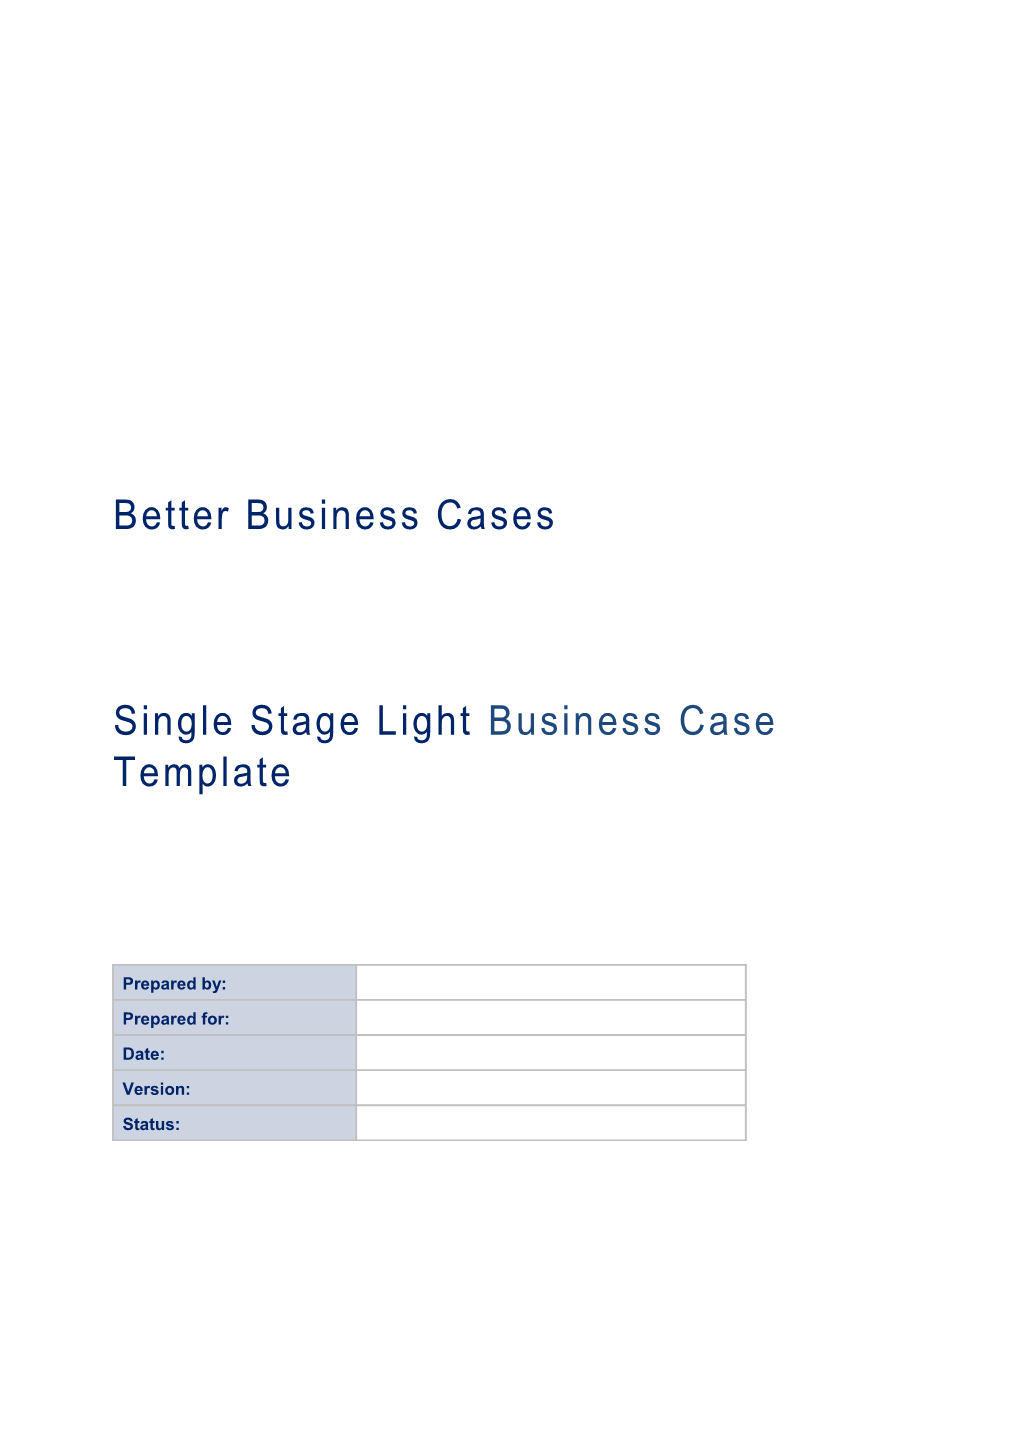 Better Business Cases: Indicative Business Case Template